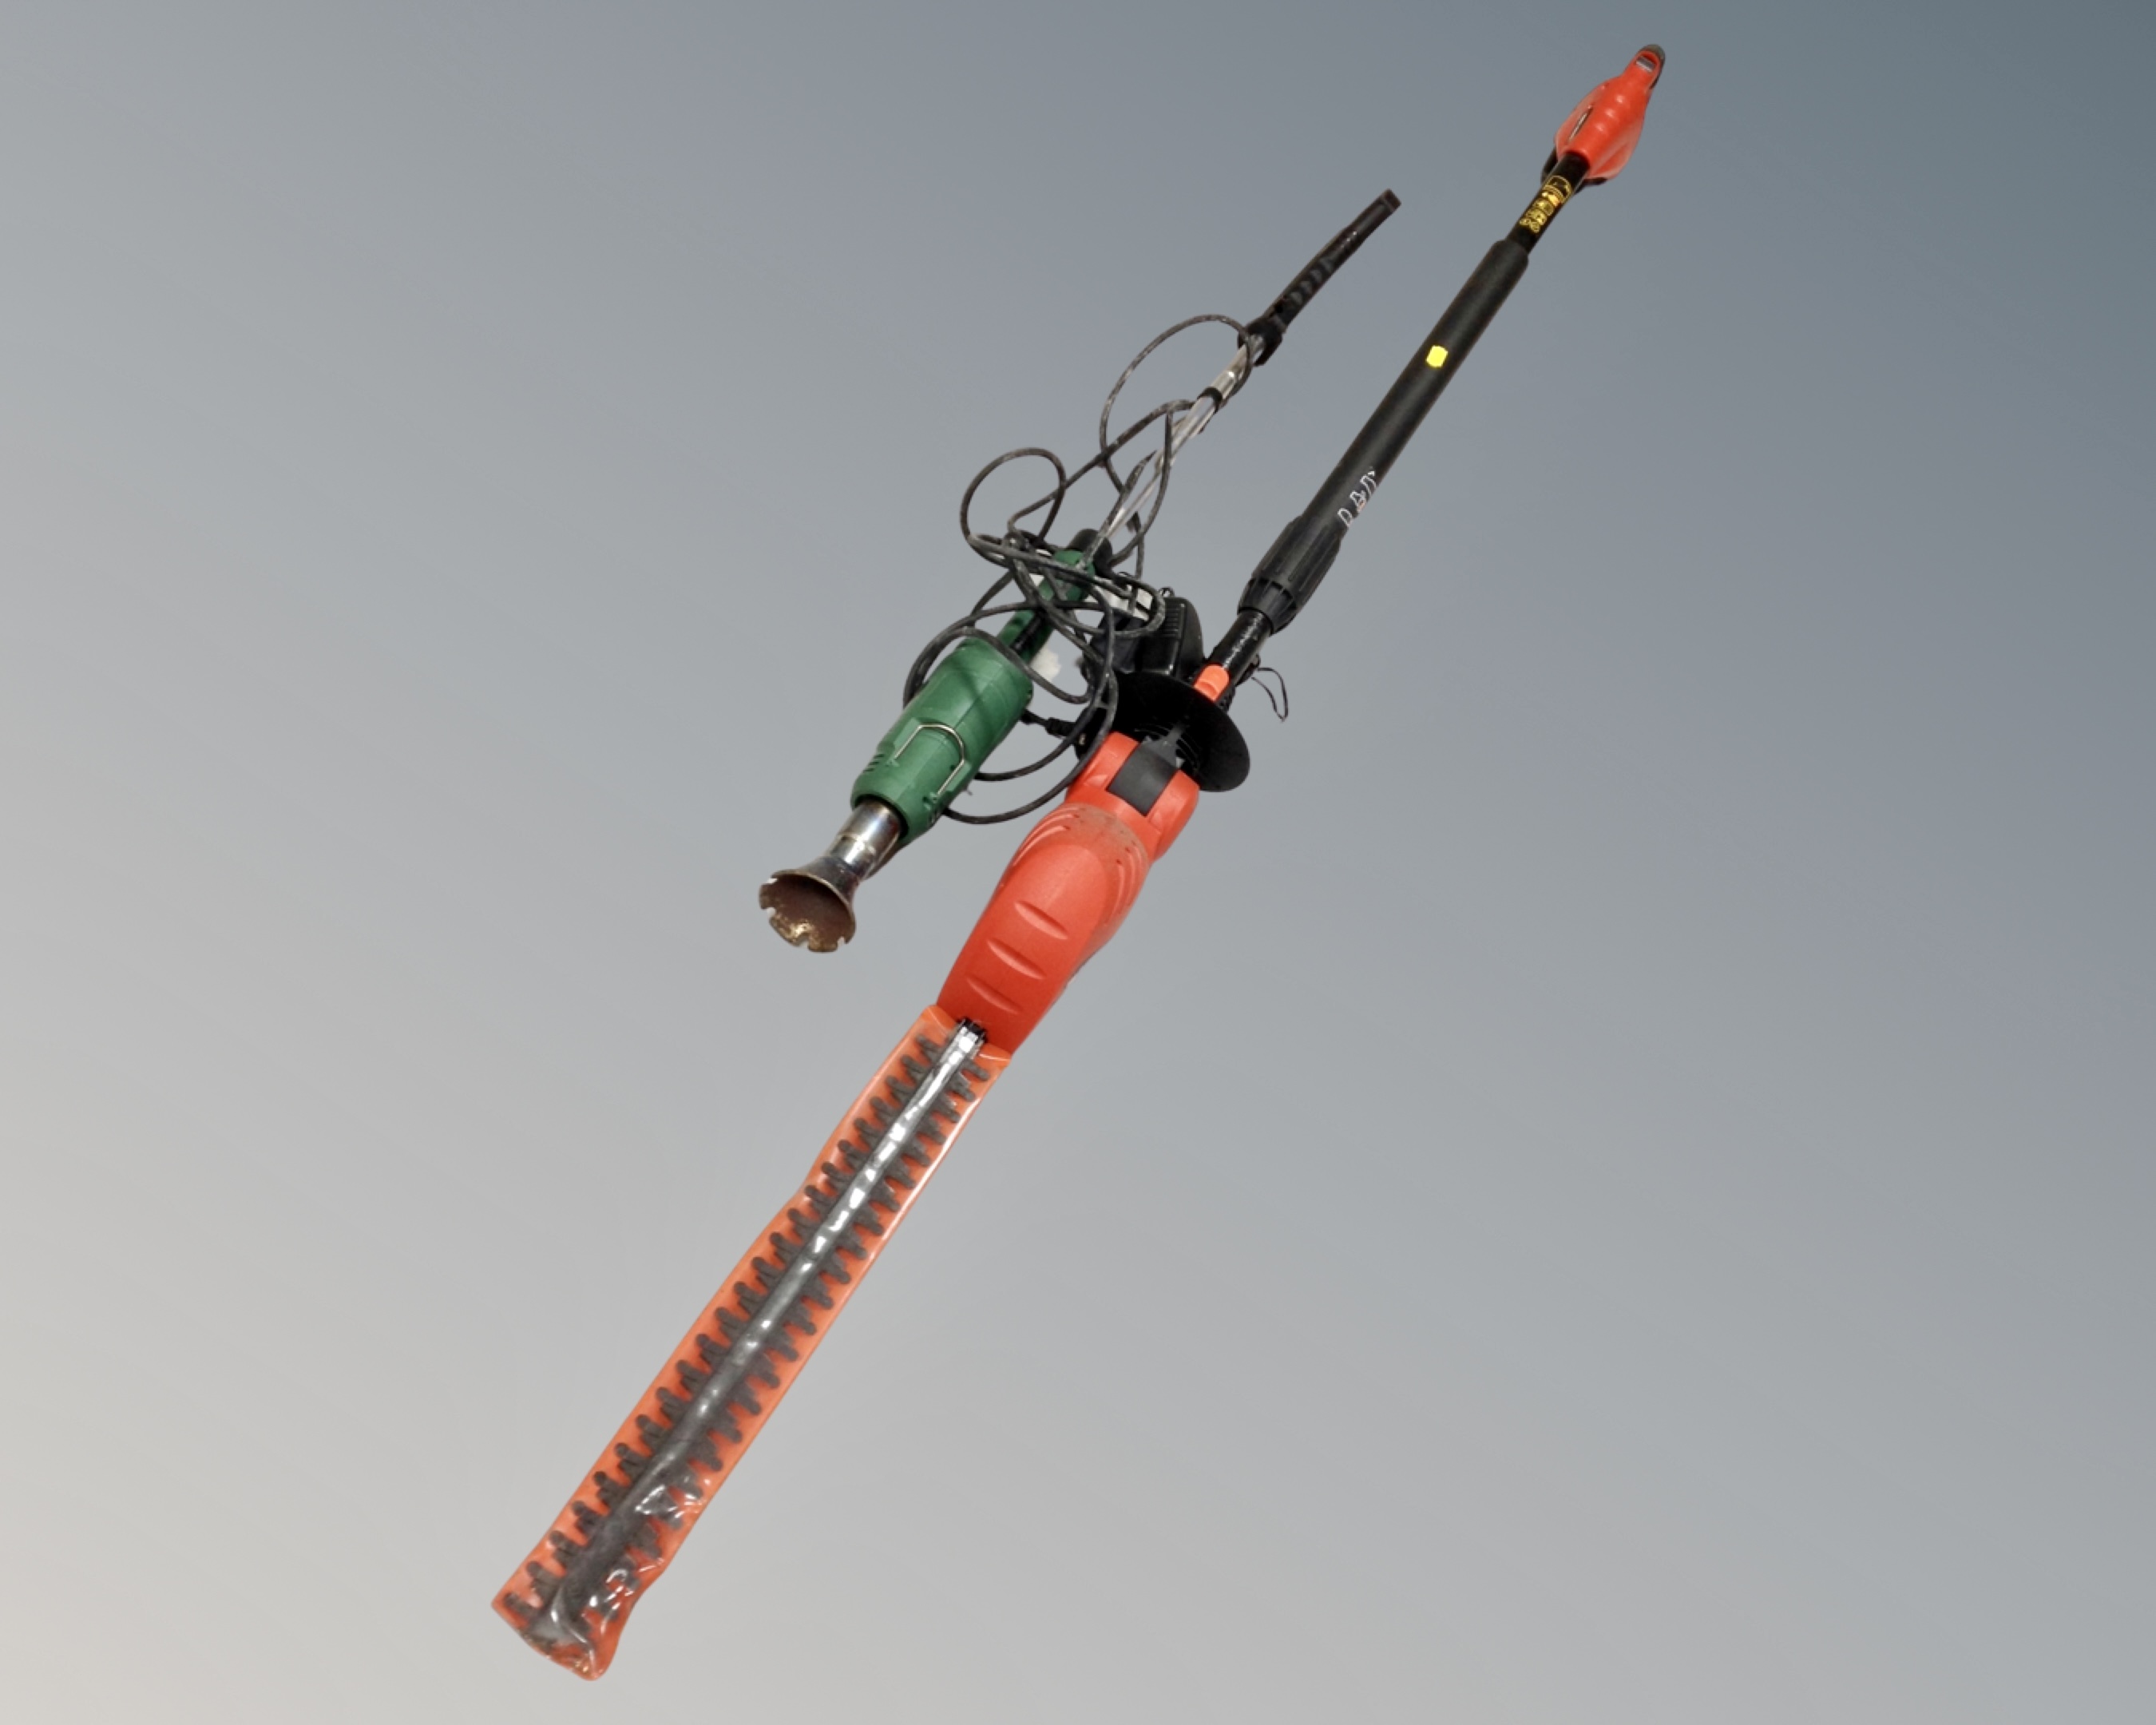 A Black and Decker GTC 800 electric pole saw with battery and charger together with brush burner